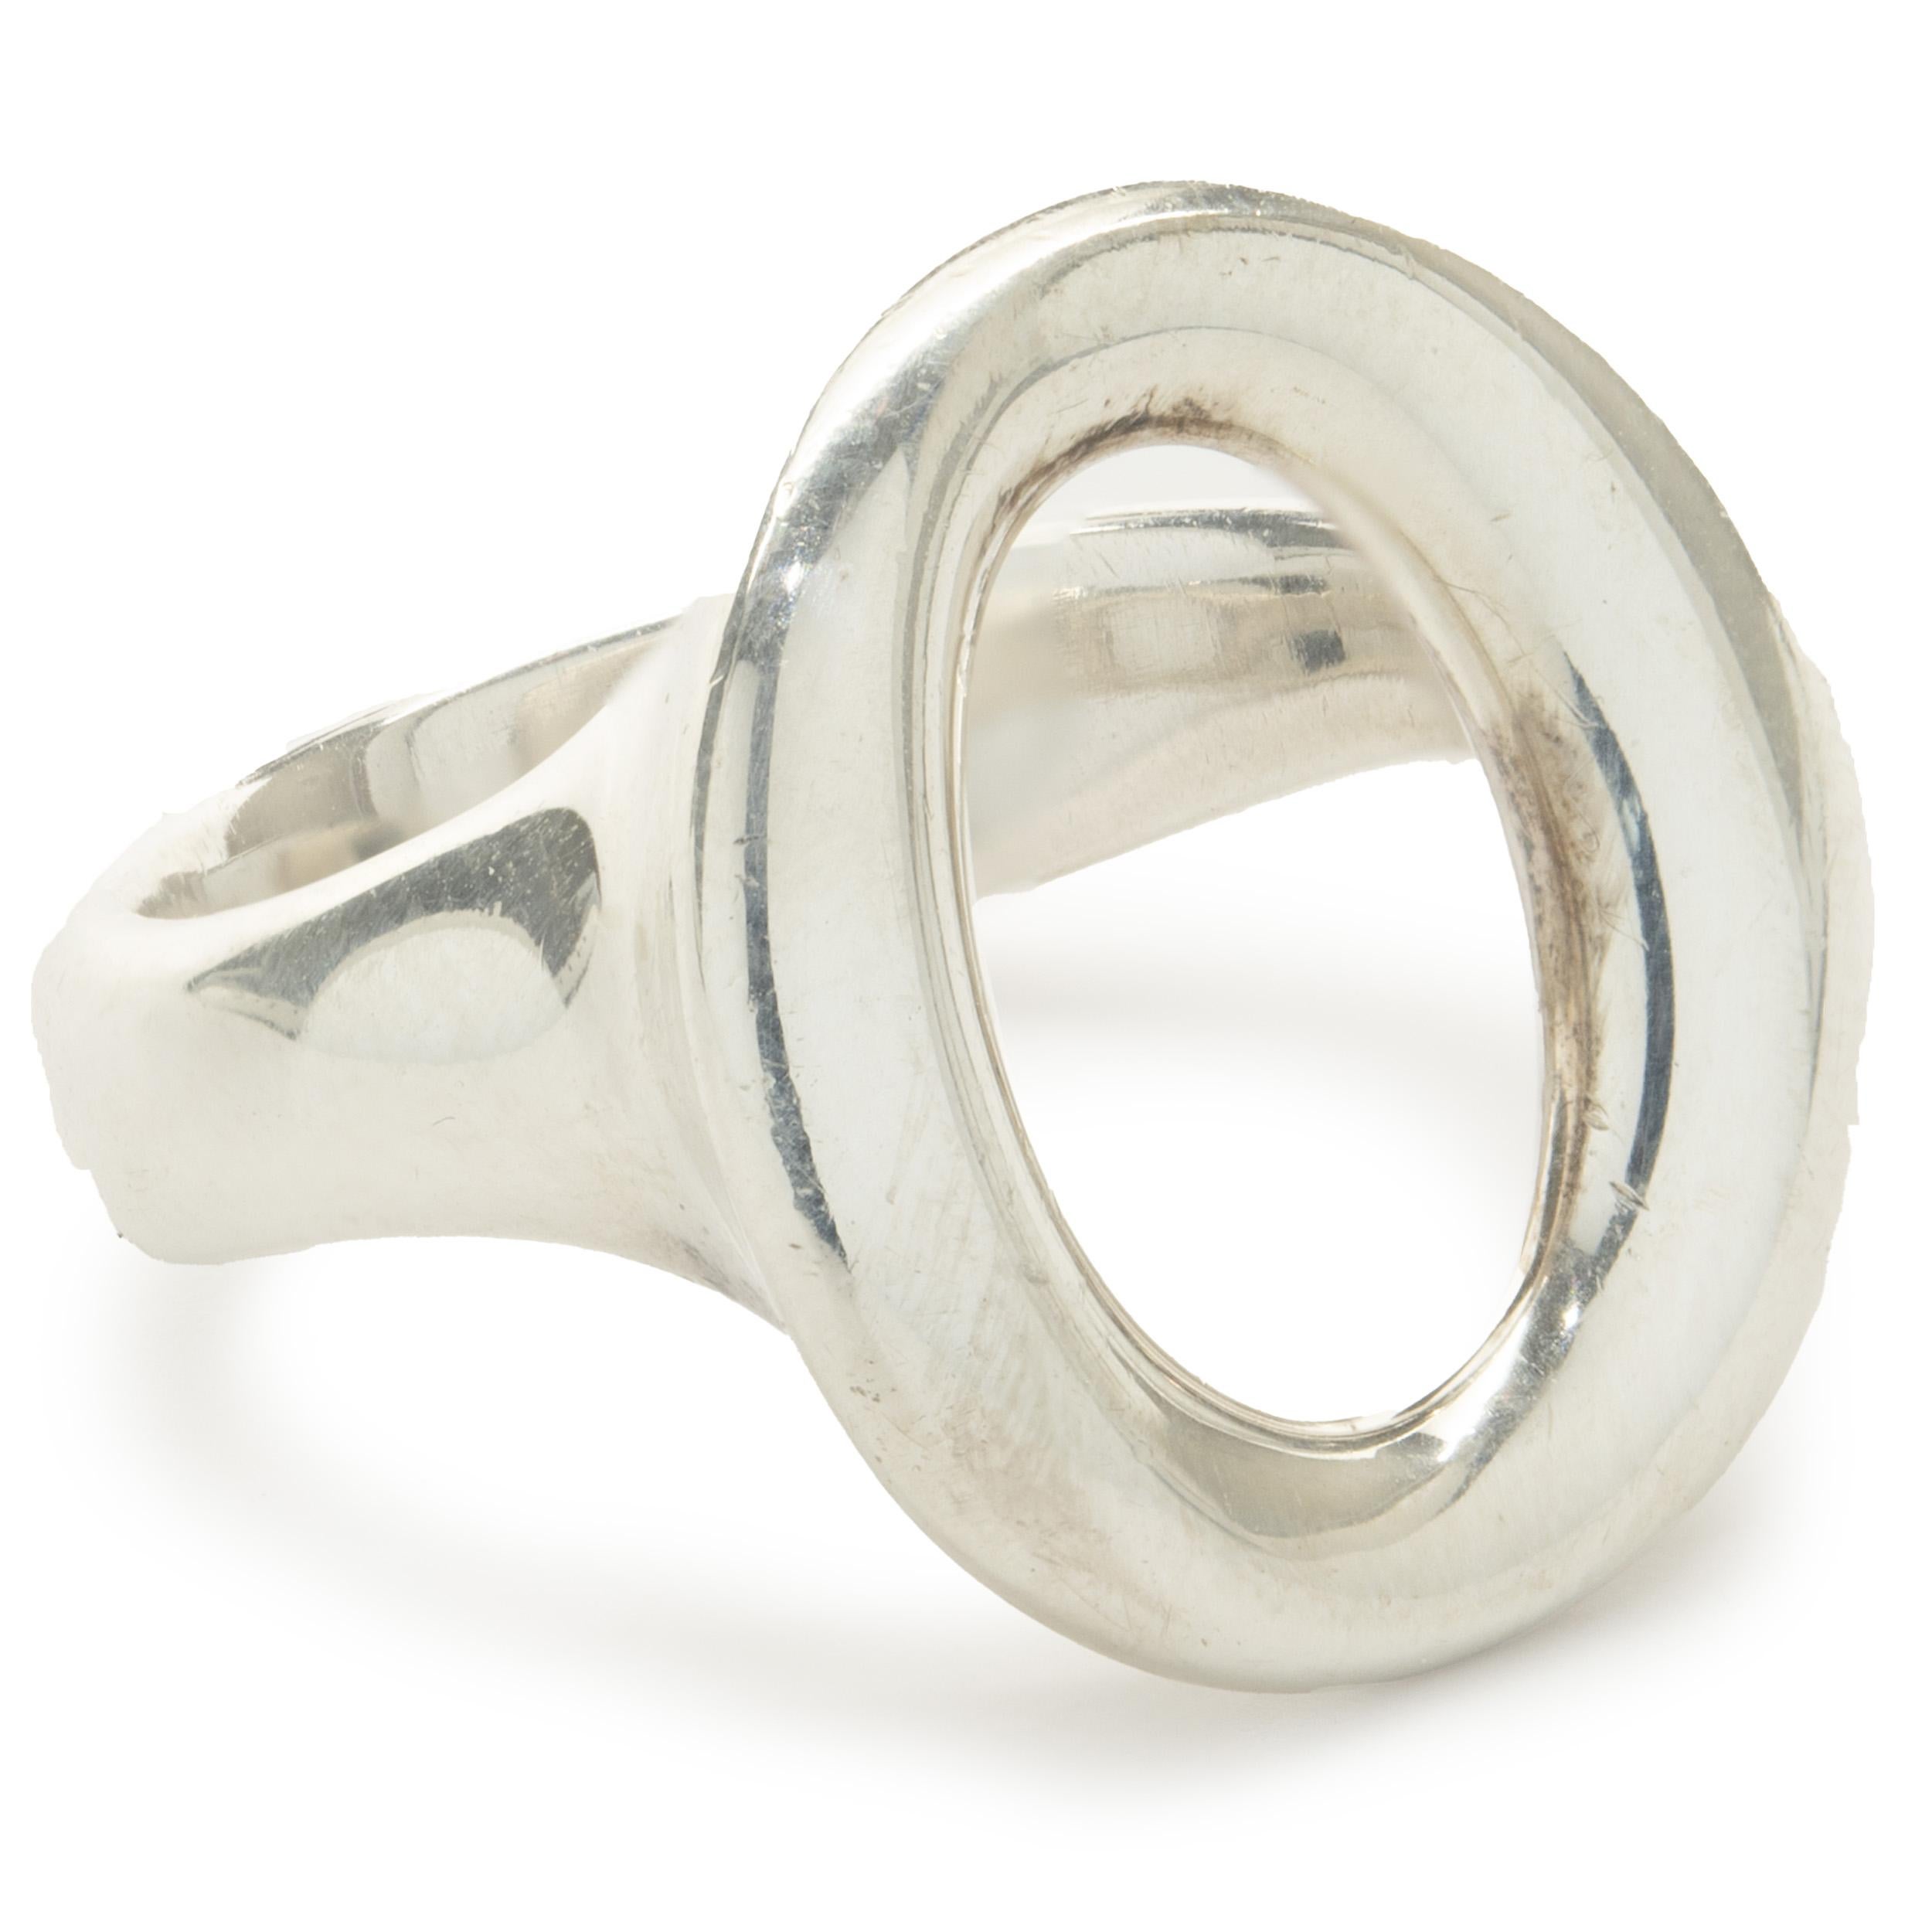 Designer: Tiffany & Co. / Elsa Peretti
Material: Sterling silver
Dimensions: ring top measures 19mm wide
Size: 8 (complimentary sizing available) 
Weight: 9.14 grams
